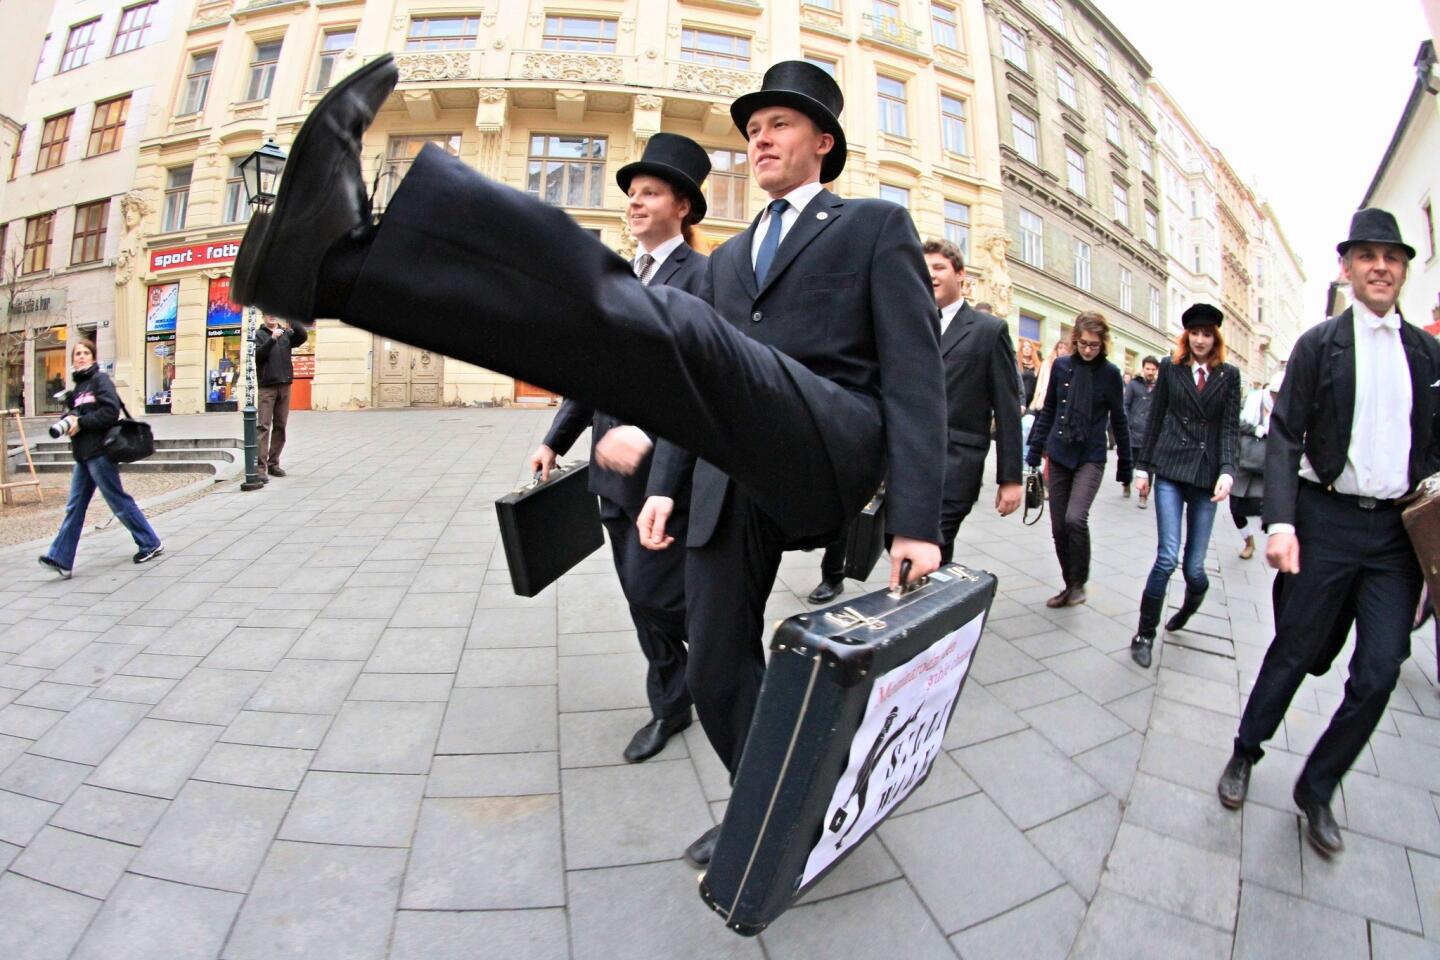 From the Ministry of Silly Walks